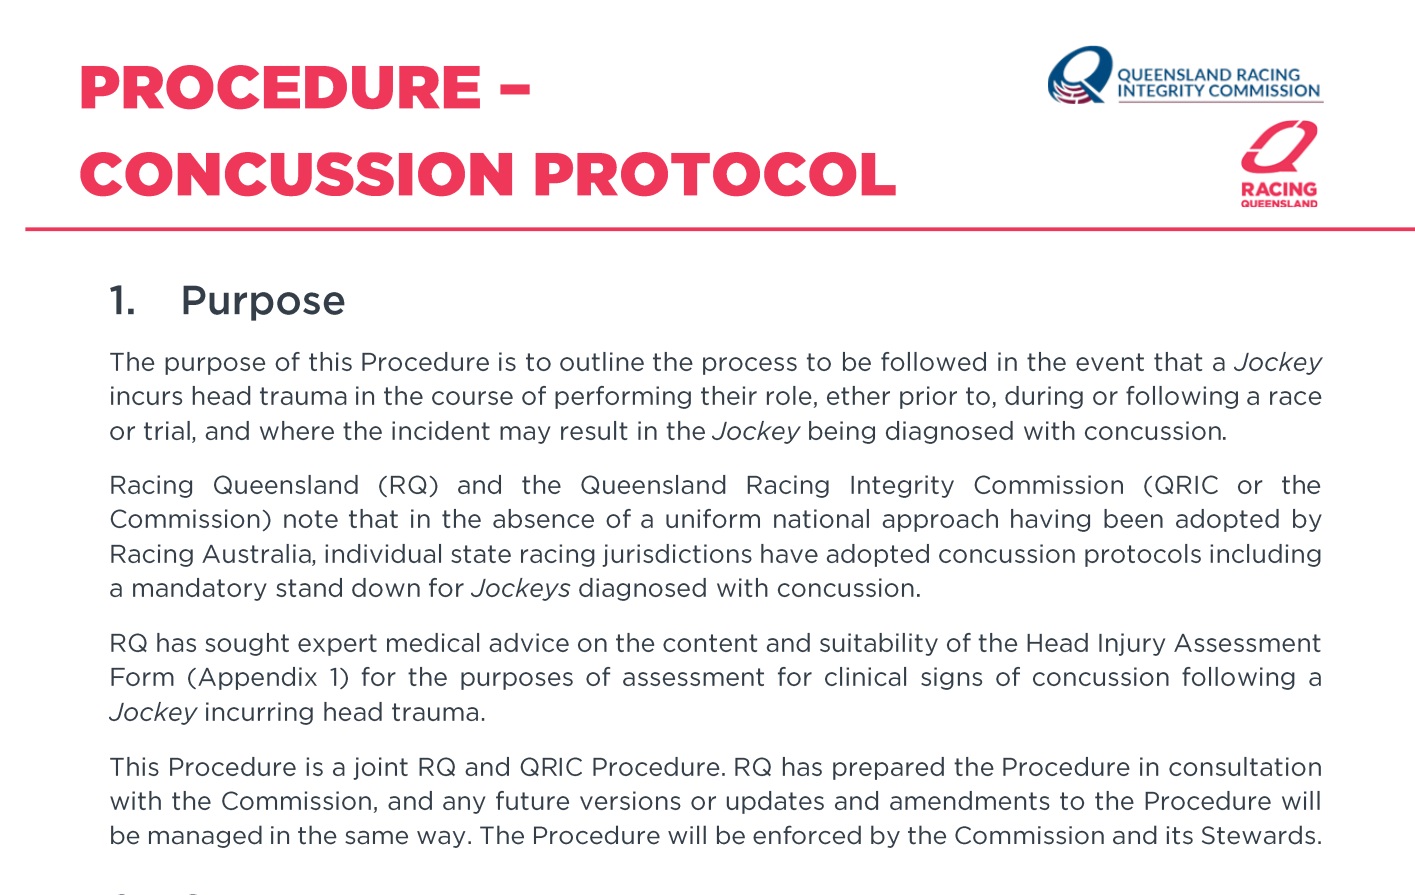 There Are a Few Vital Parts Missing in the New Concussion Protocols in QLD